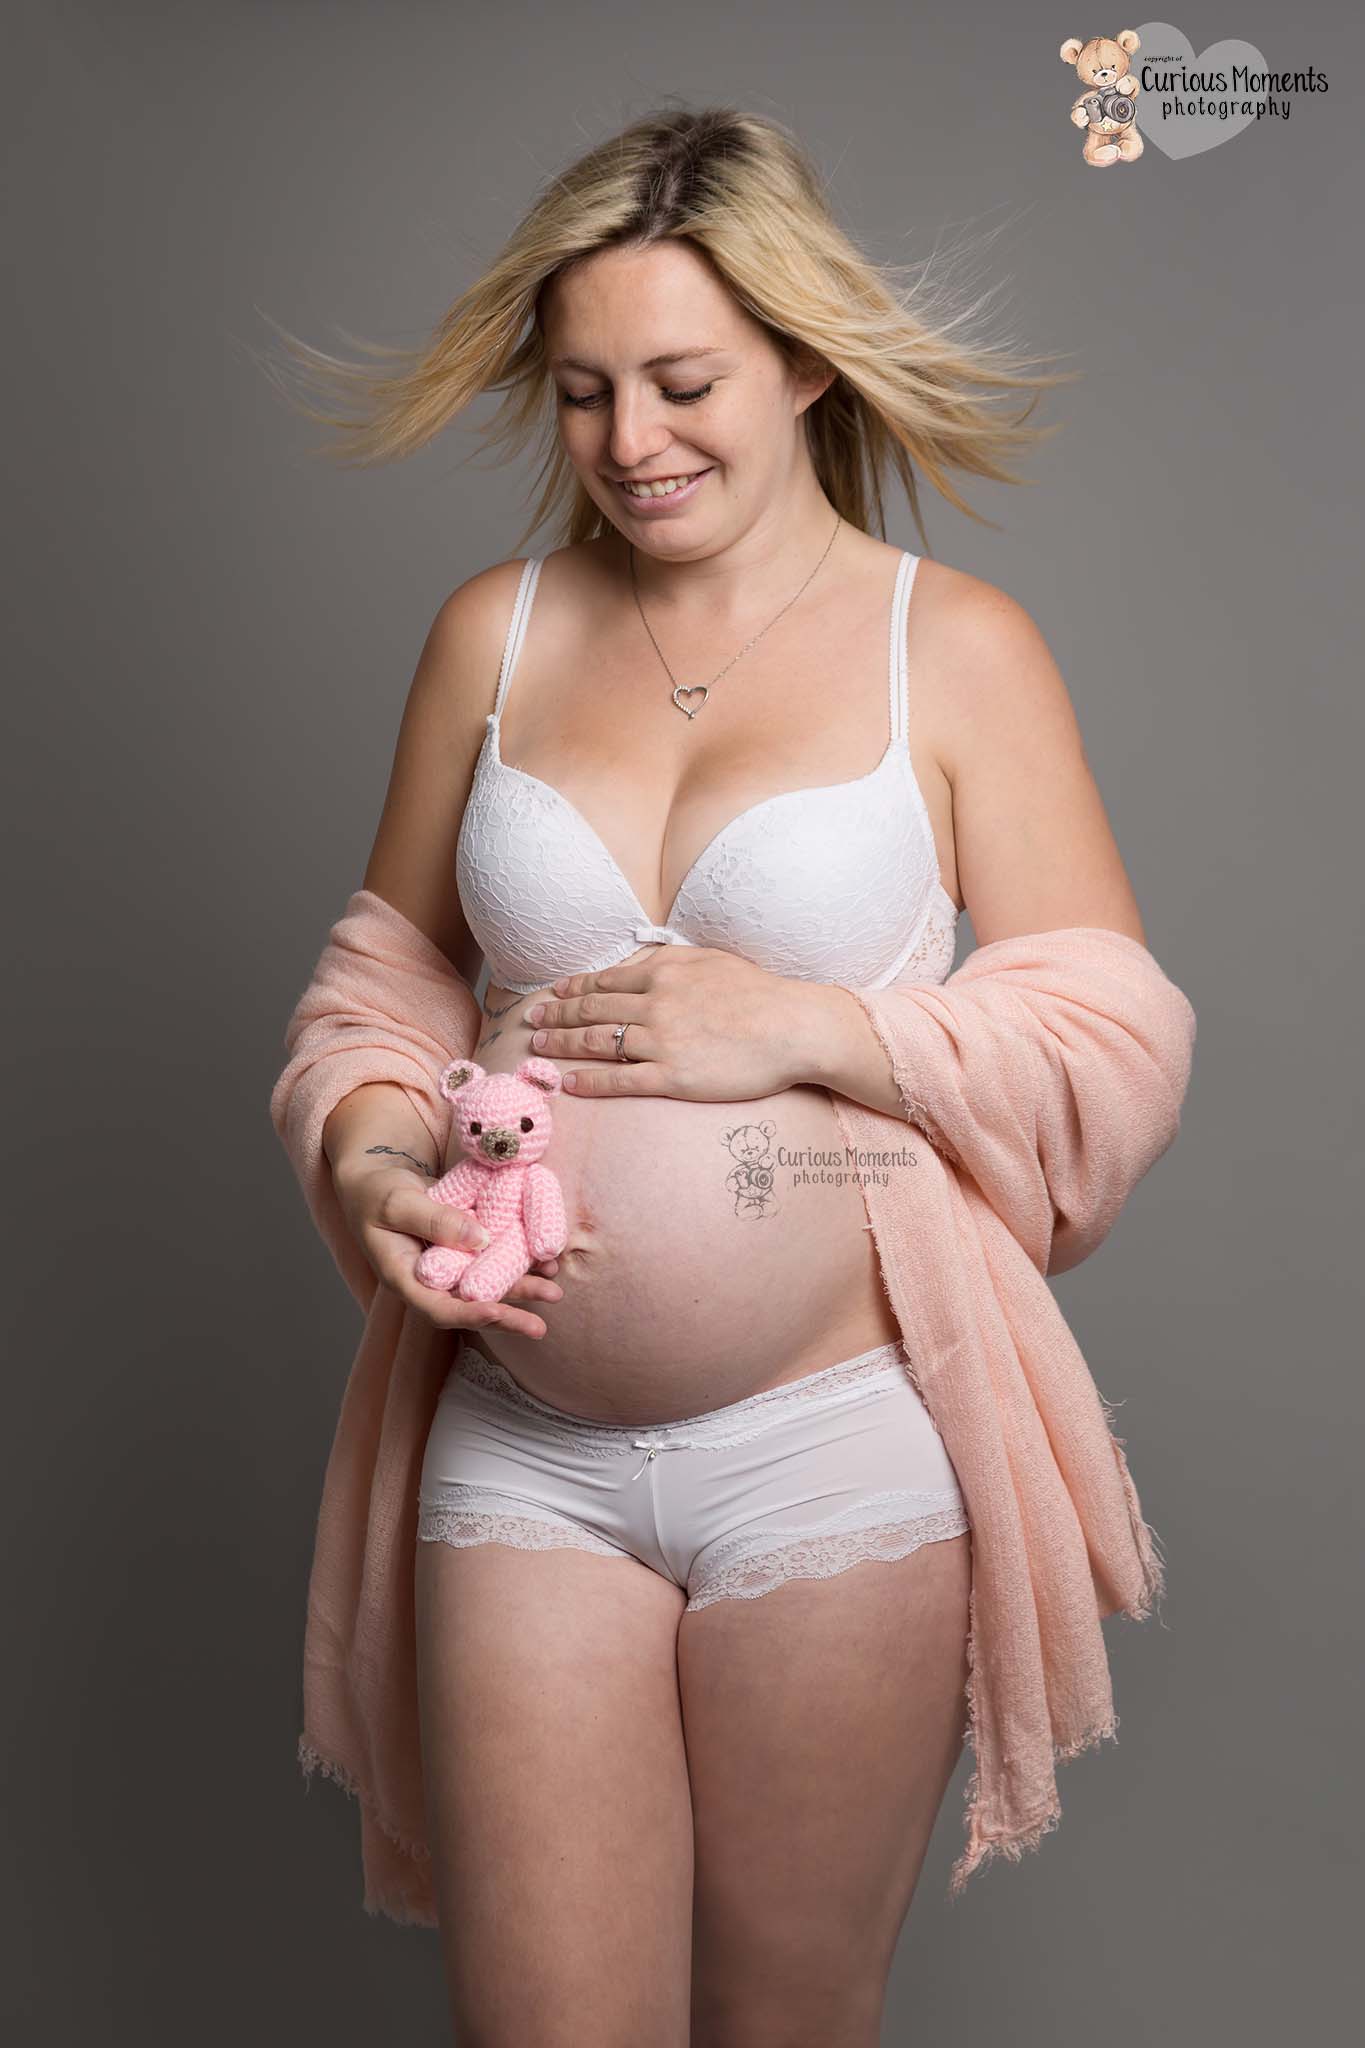 Pregnant lady expecting baby girl wearing white underwaer with off the shoulder pink drape holding pink teddy bear during her pregnancy photoshoot